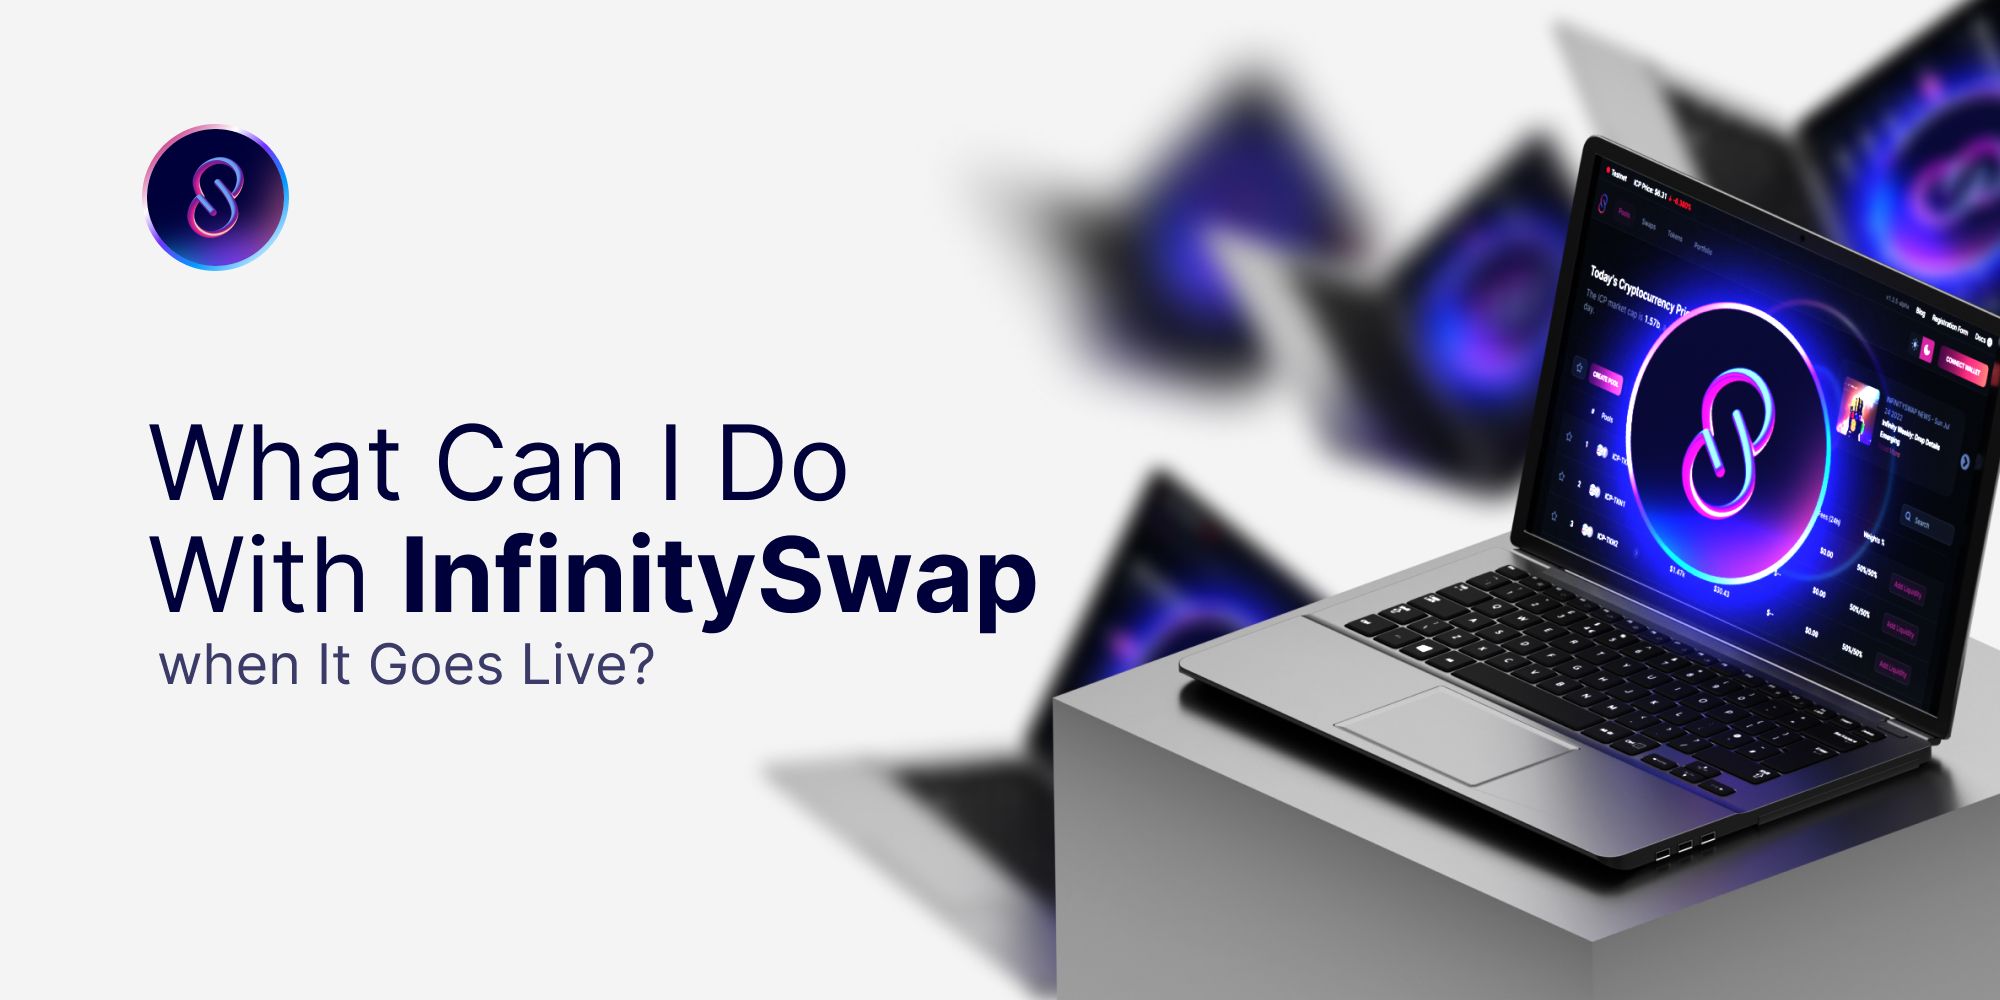 What Can I Do With InfinitySwap When It Goes Live?